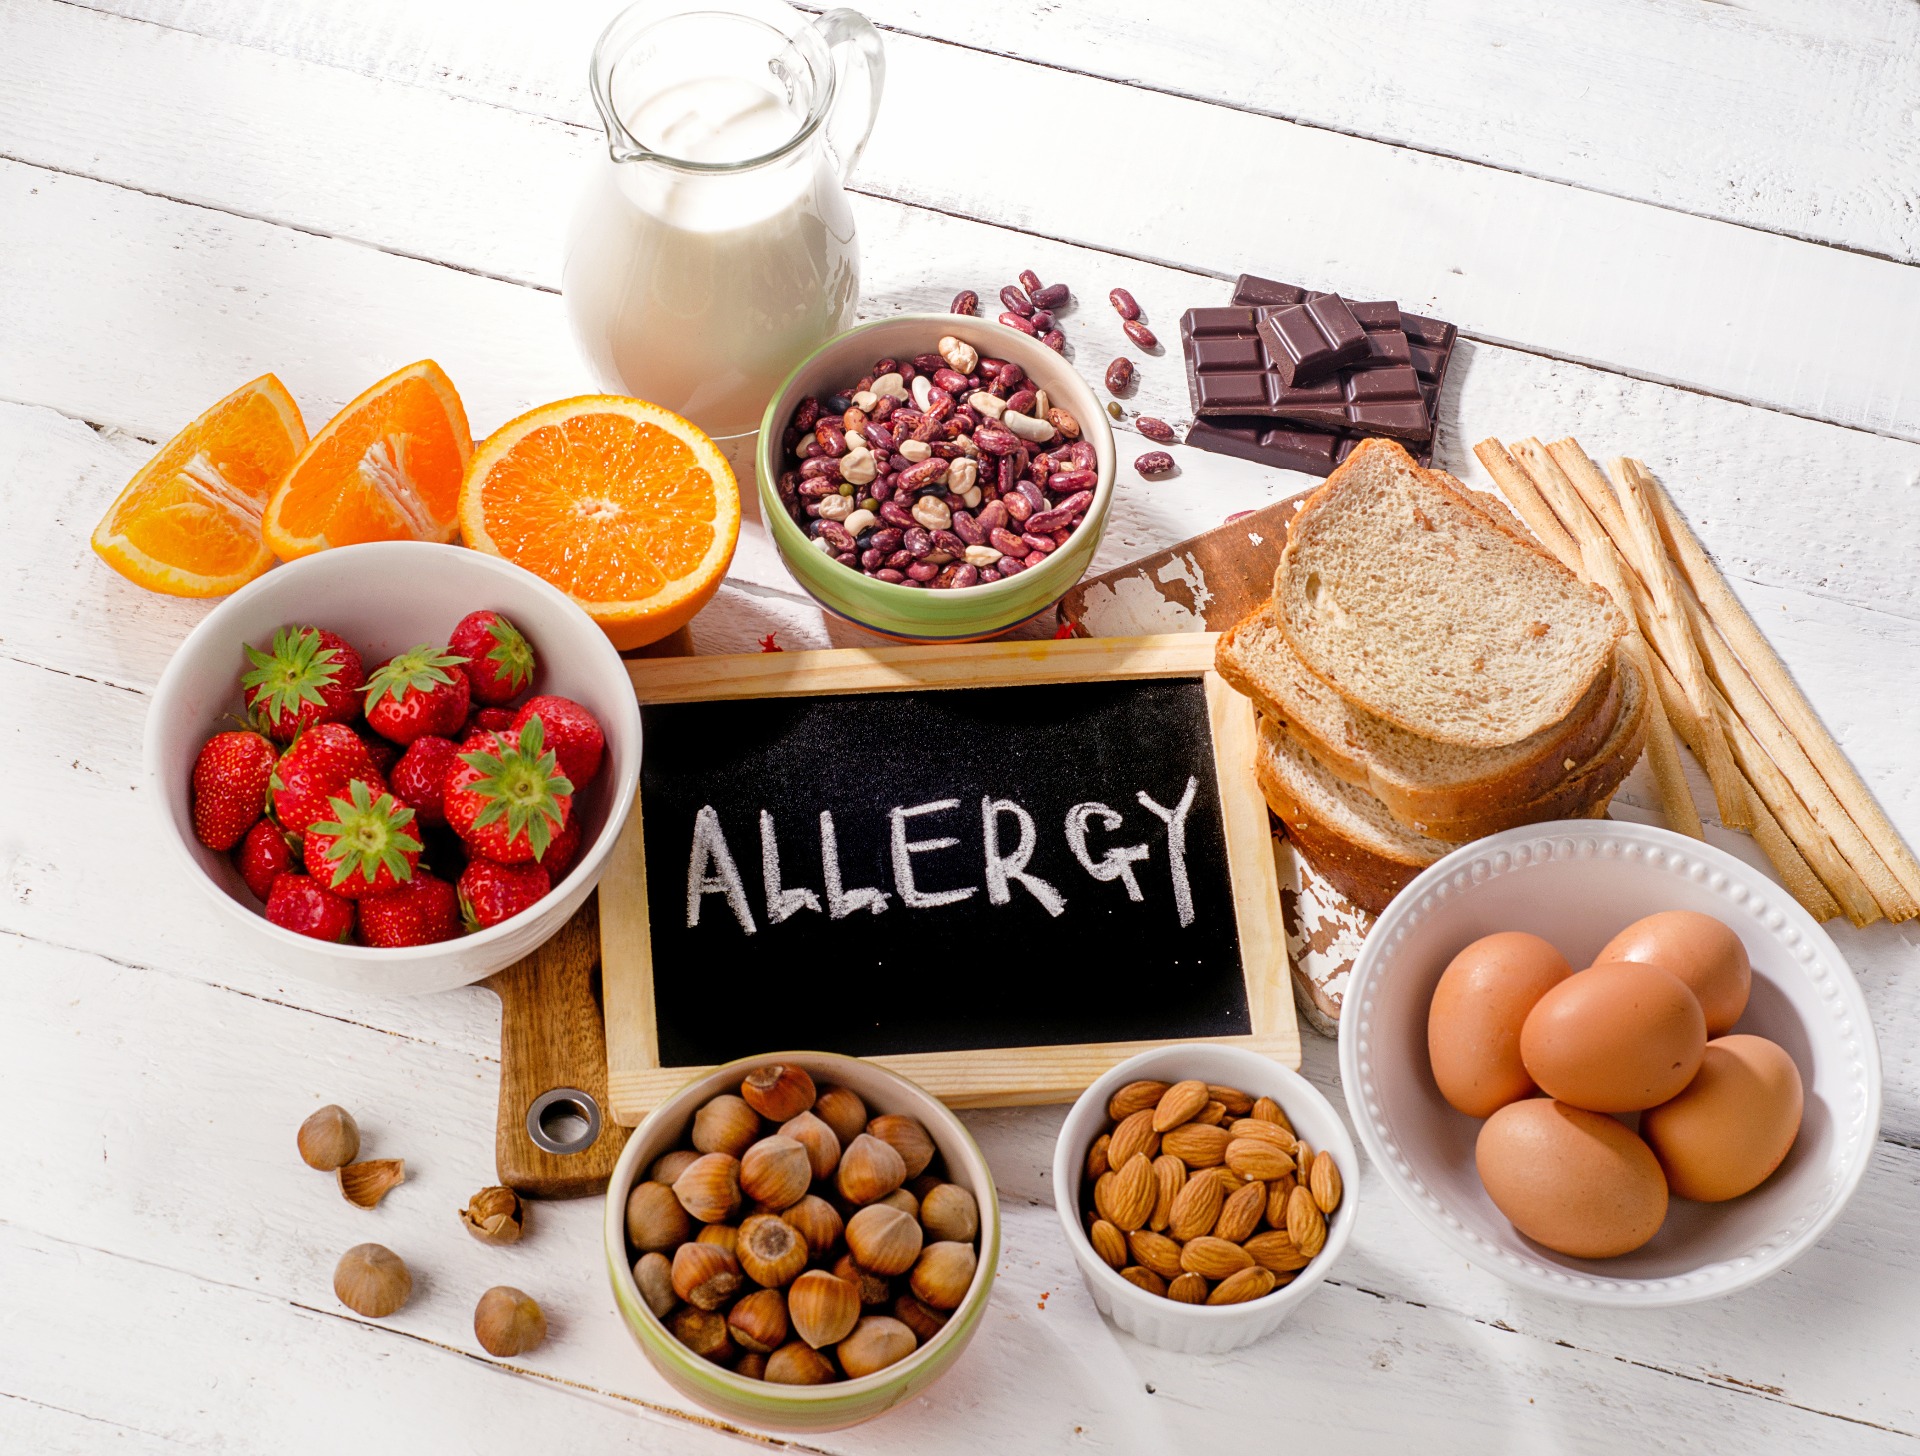 'Allergy' written on a chalk board, surrounded by allergens, including strawberries, bread, eggs, fruit, nuts and milk.